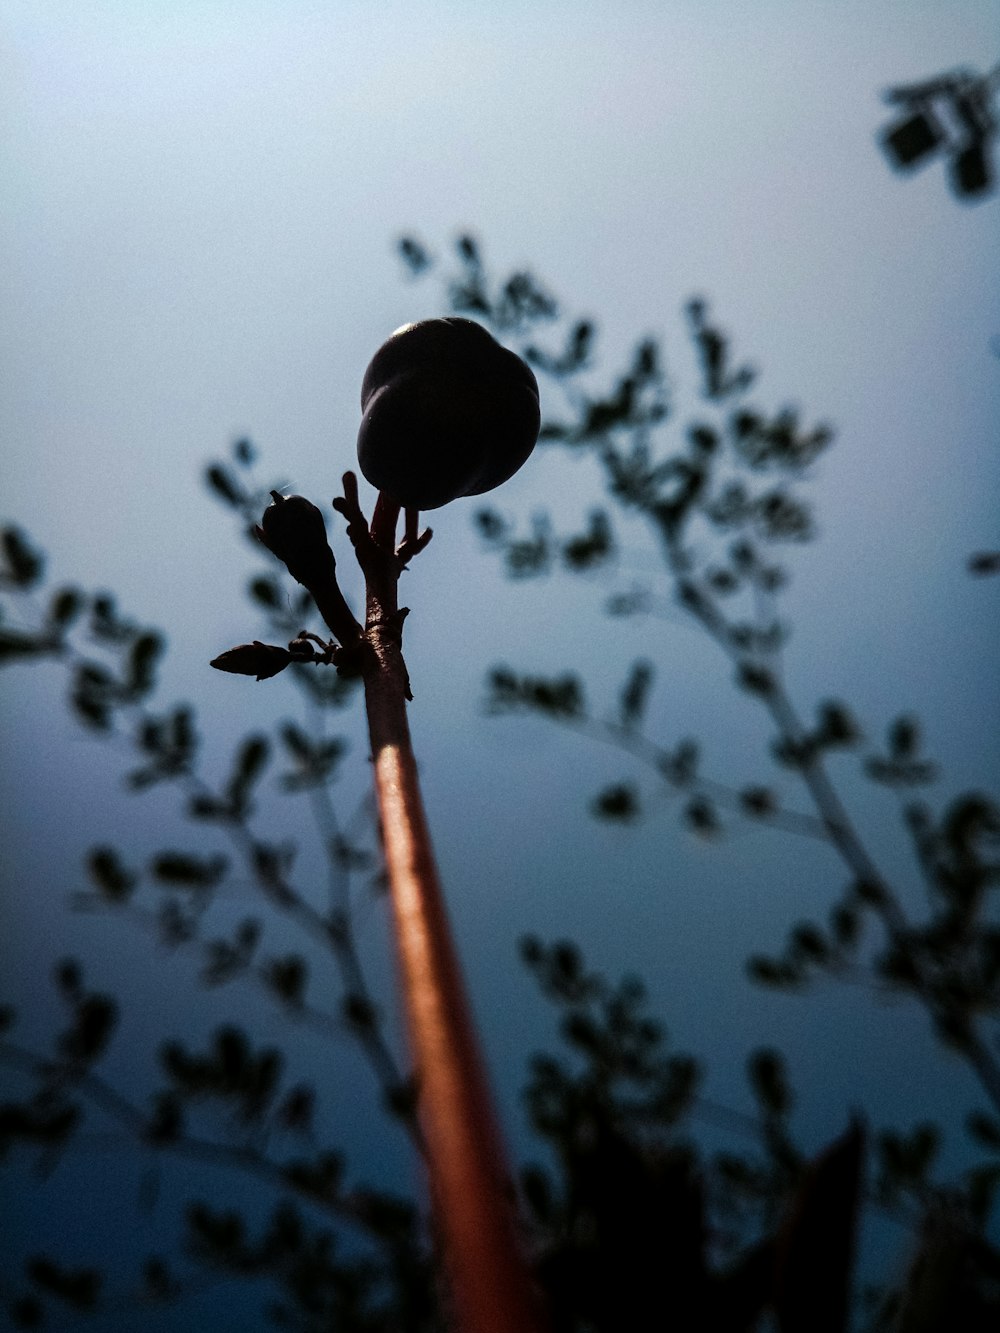 a close up of a tree branch with a sky in the background